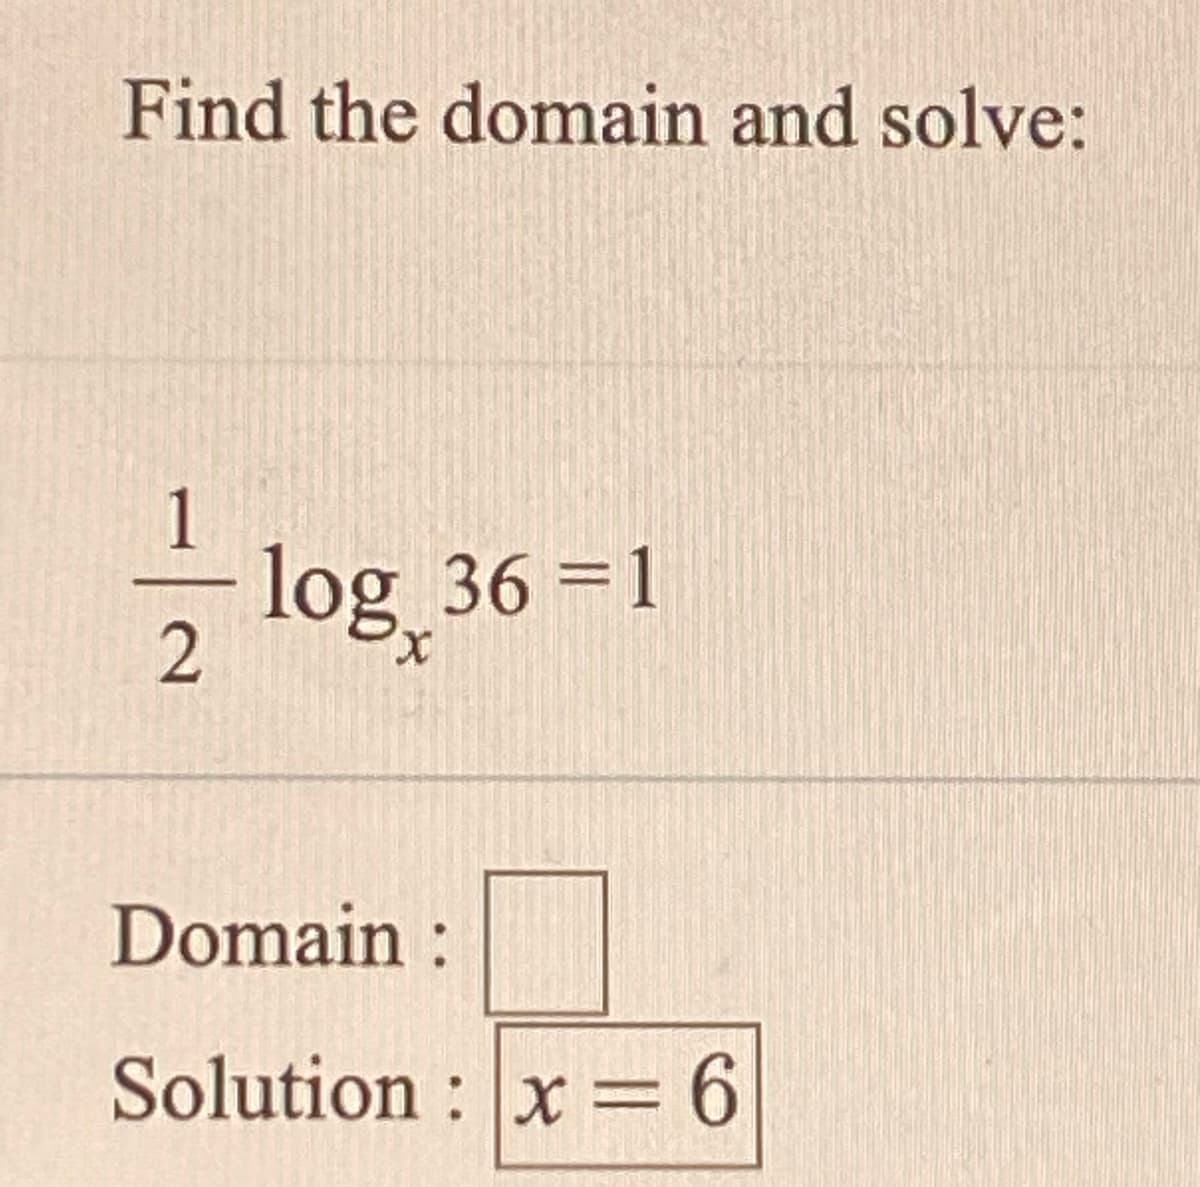 Find the domain and solve:
1
log 36 =1
Domain :
Solution : x =6
